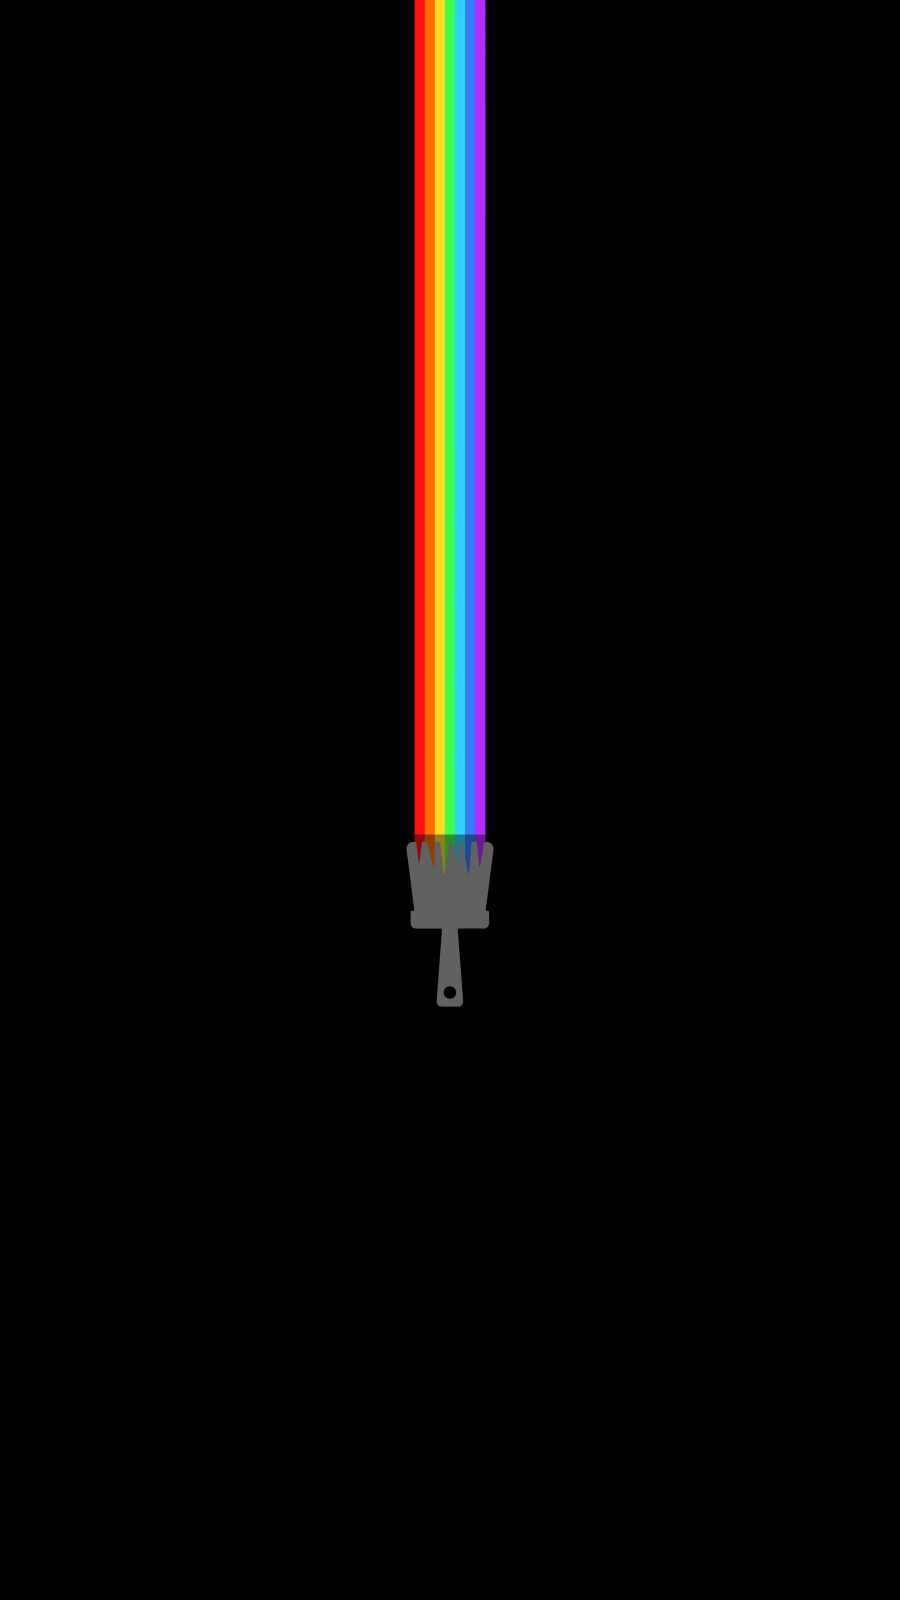 Amoled Paint Brush IPhone Wallpaper  IPhone Wallpapers